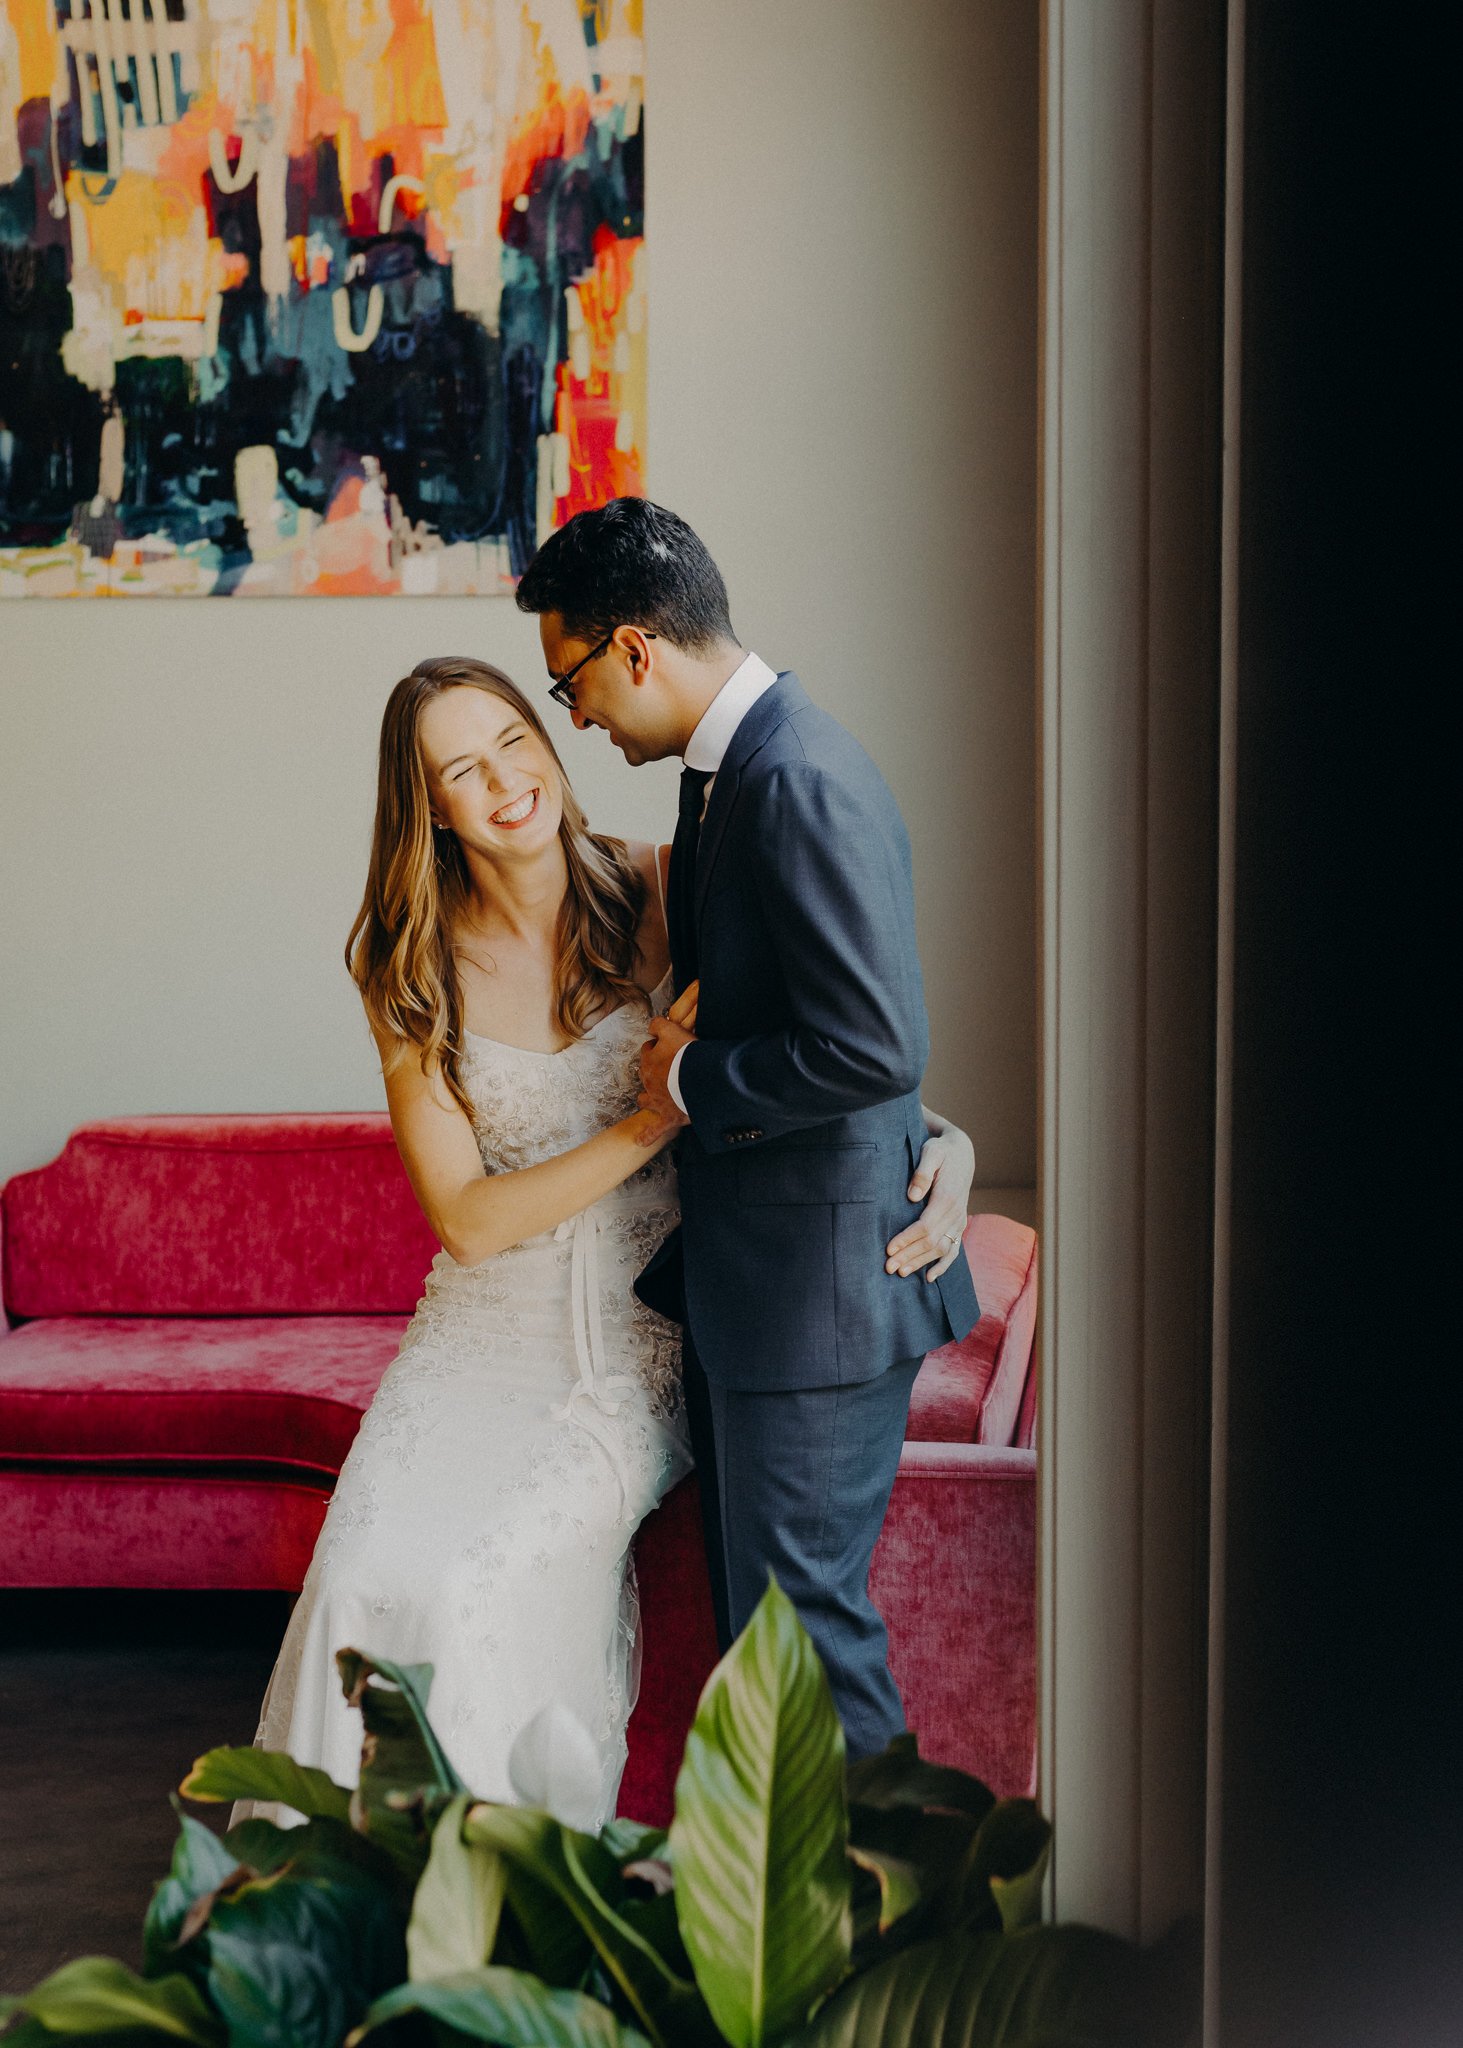 the fig house wedding - queer wedding photographers in los angeles - itlaphoto.com-33.jpg